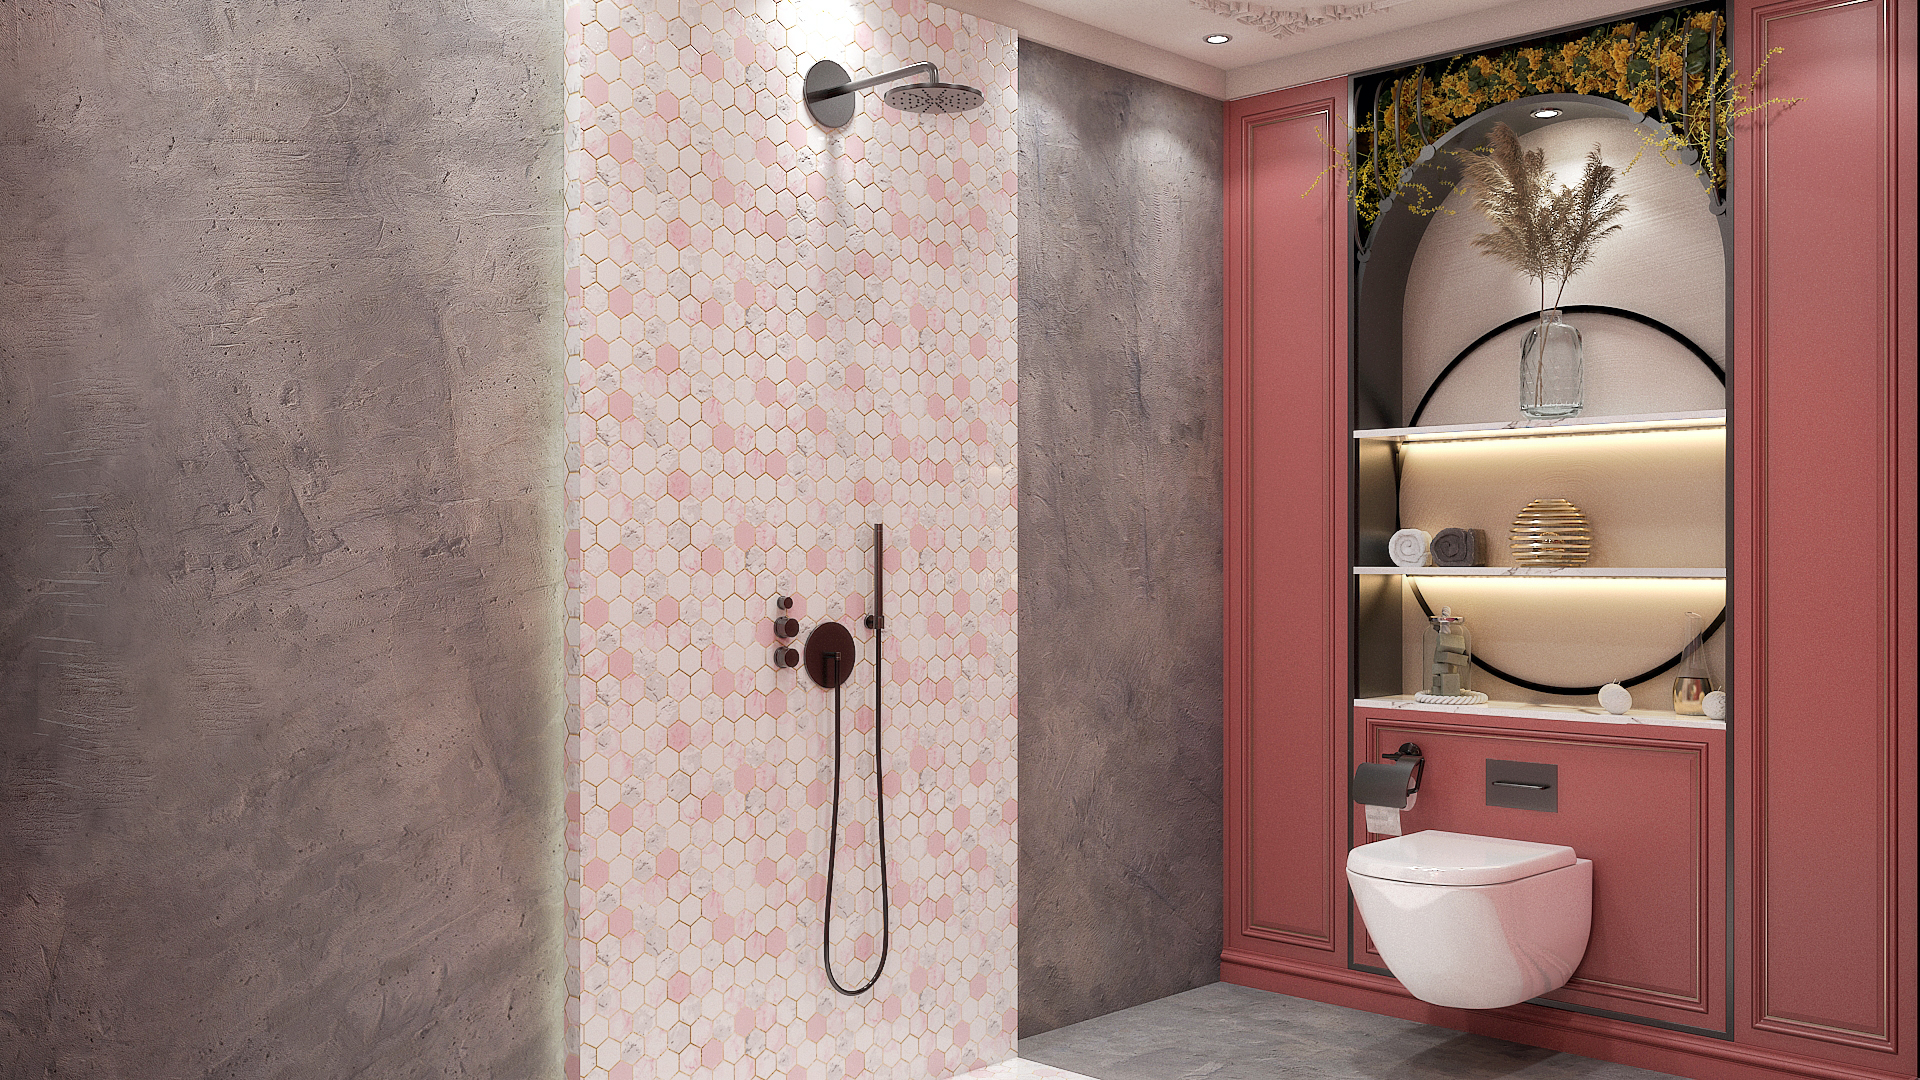 A Bit Different Vision of Pink Bathroom